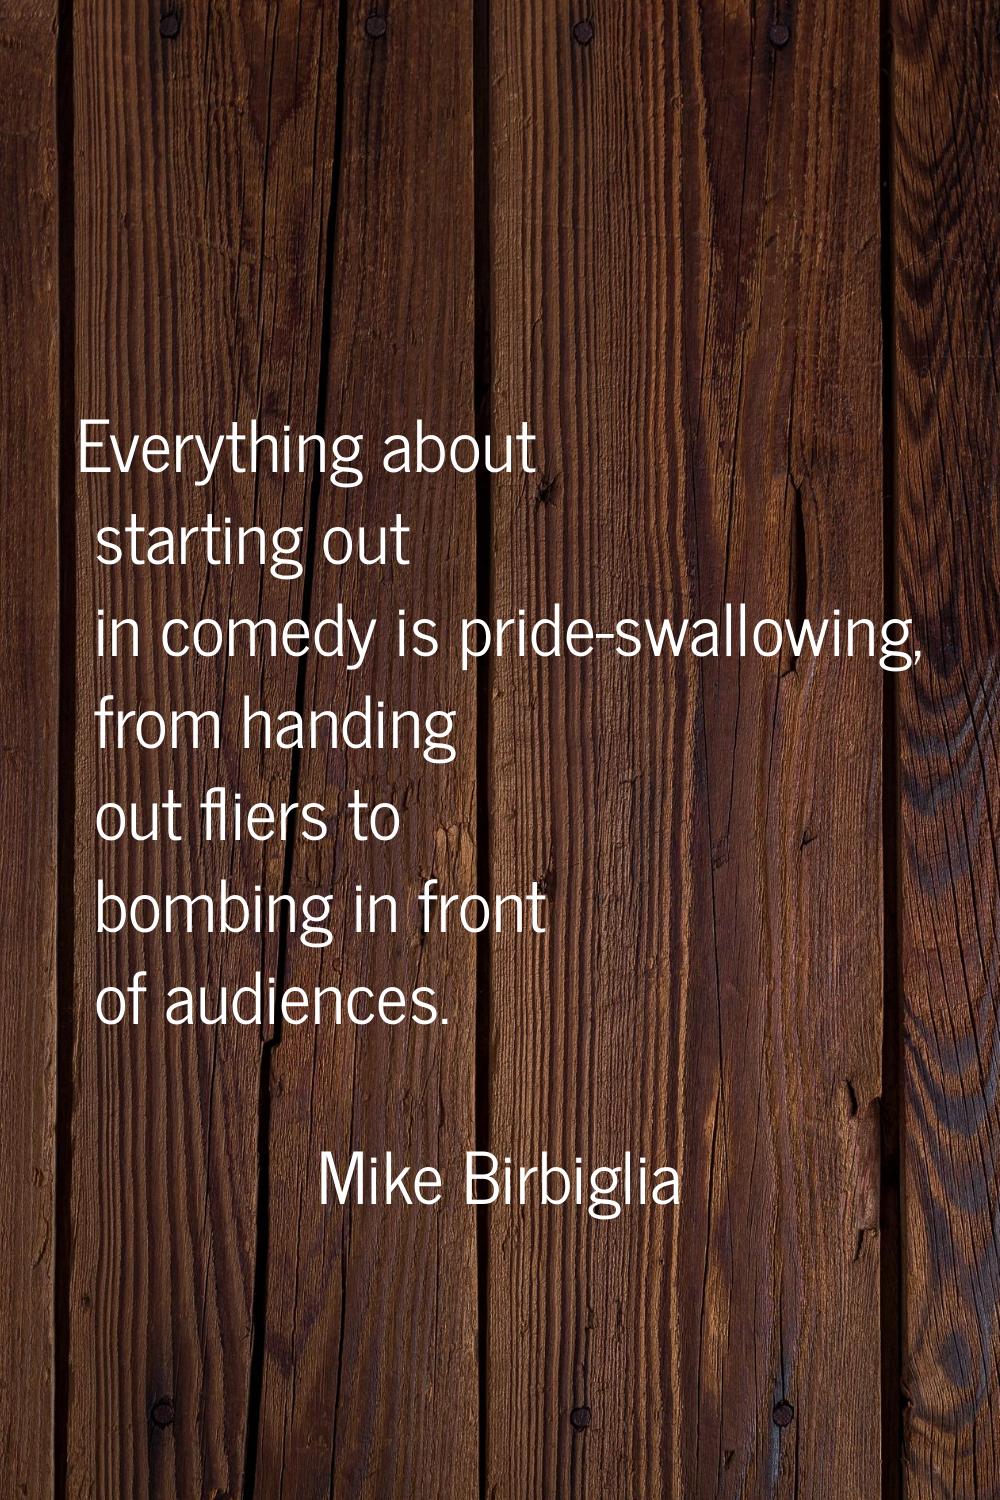 Everything about starting out in comedy is pride-swallowing, from handing out fliers to bombing in 